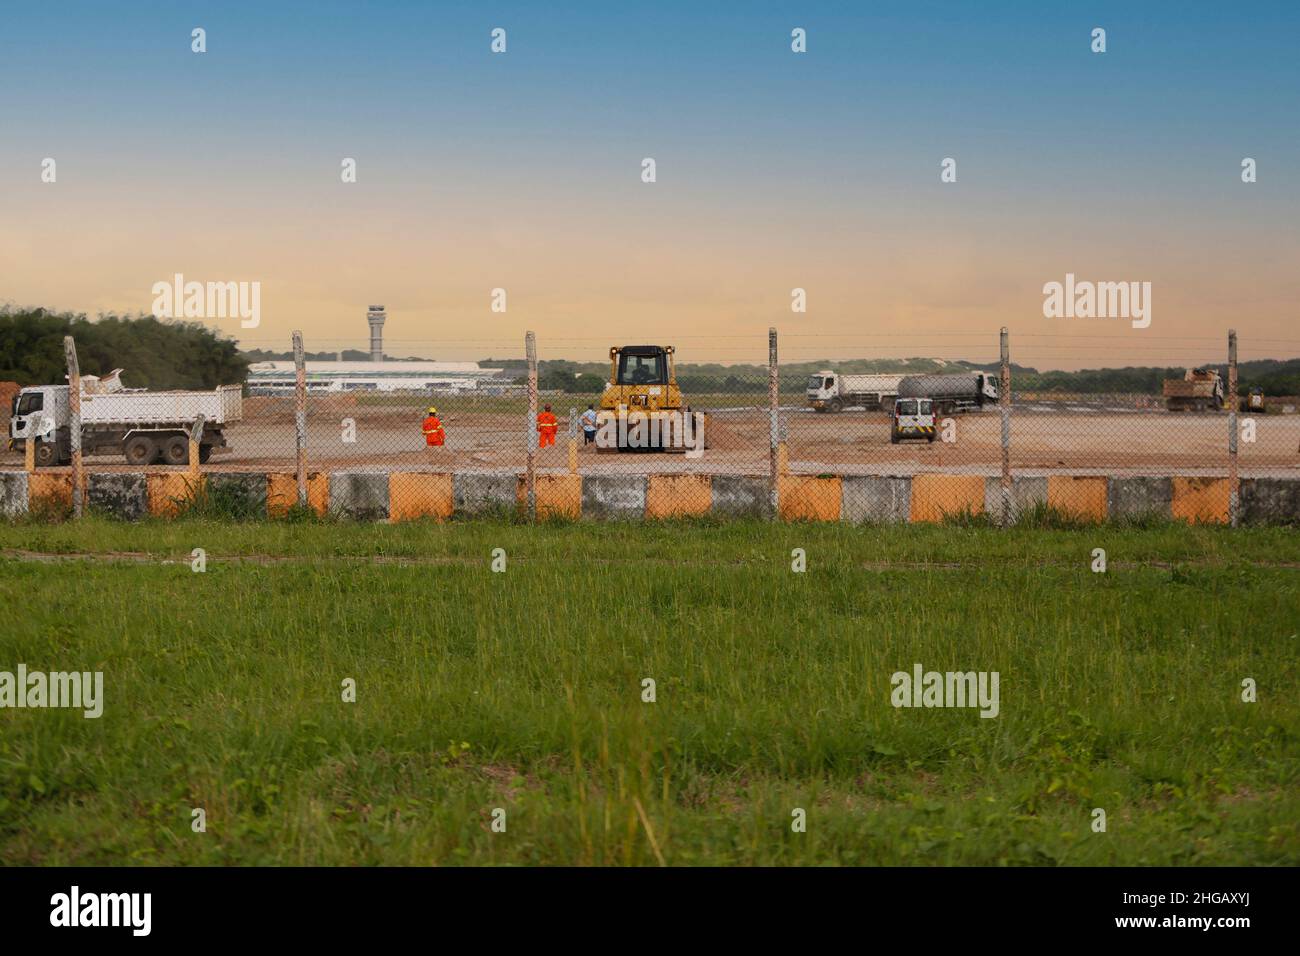 salvador, bahia, brazil - june 14, 2018: Workers and machines are seen during renovation work on the runway at the airport in the city of Salvador. Stock Photo